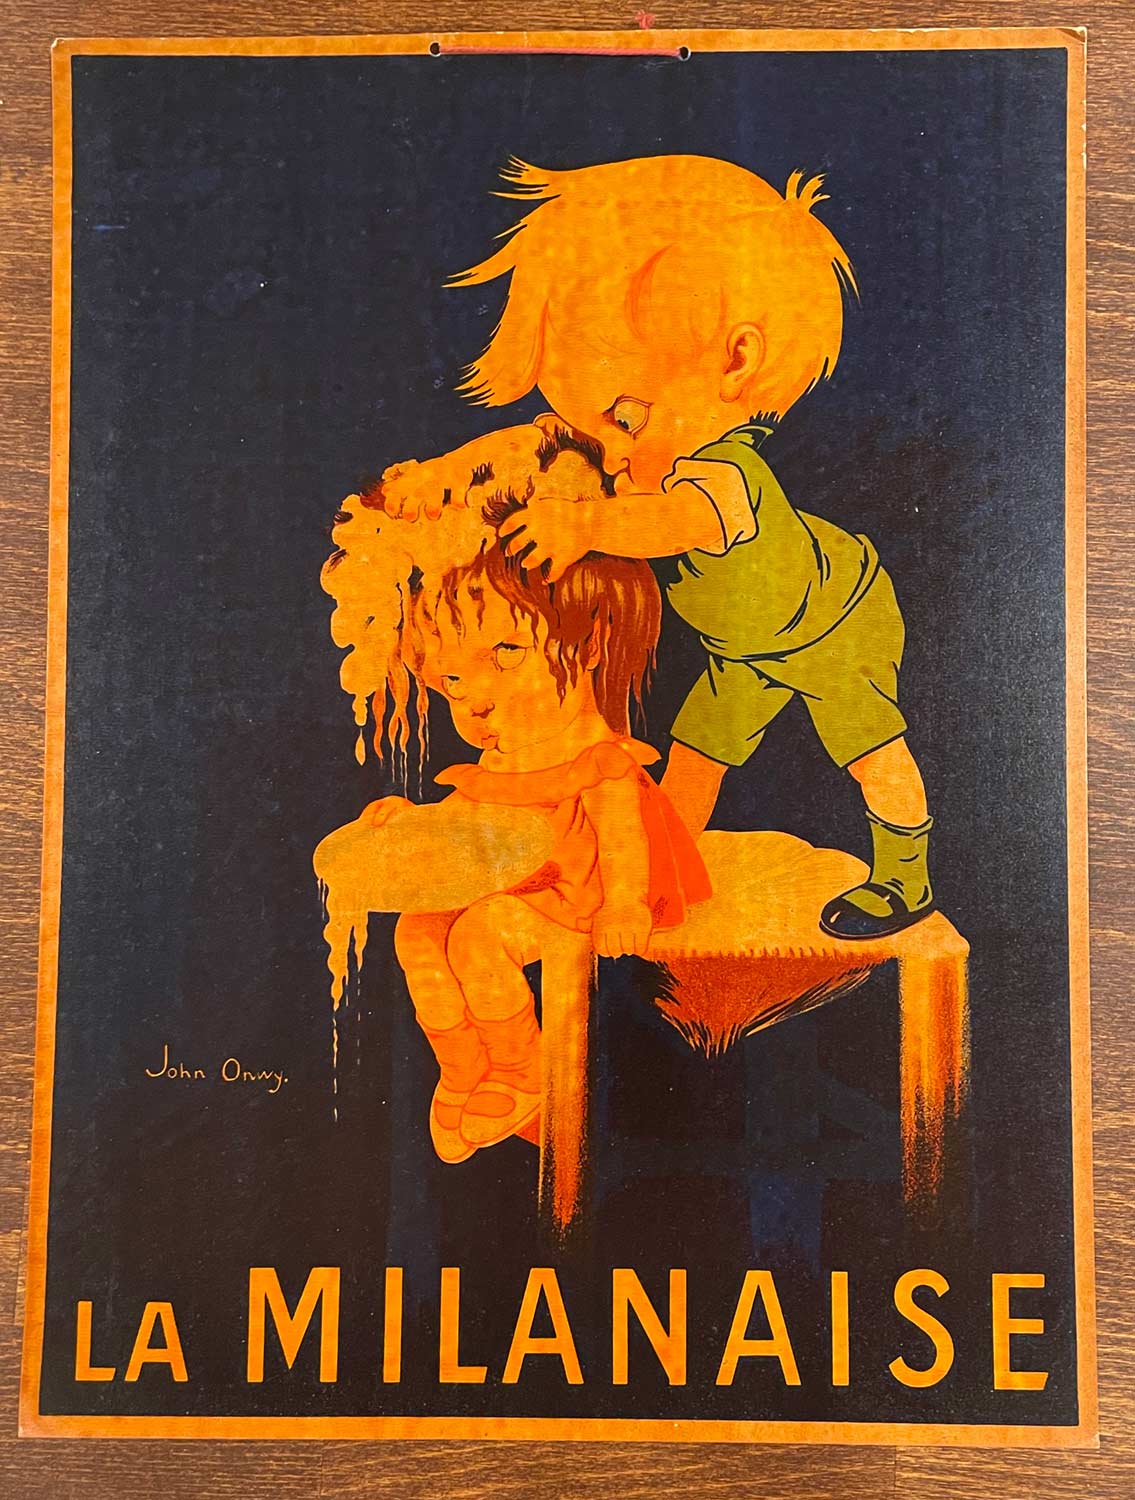 An angry young man viisciously scrubs his little sisters hair with La Milanaise shampoo.